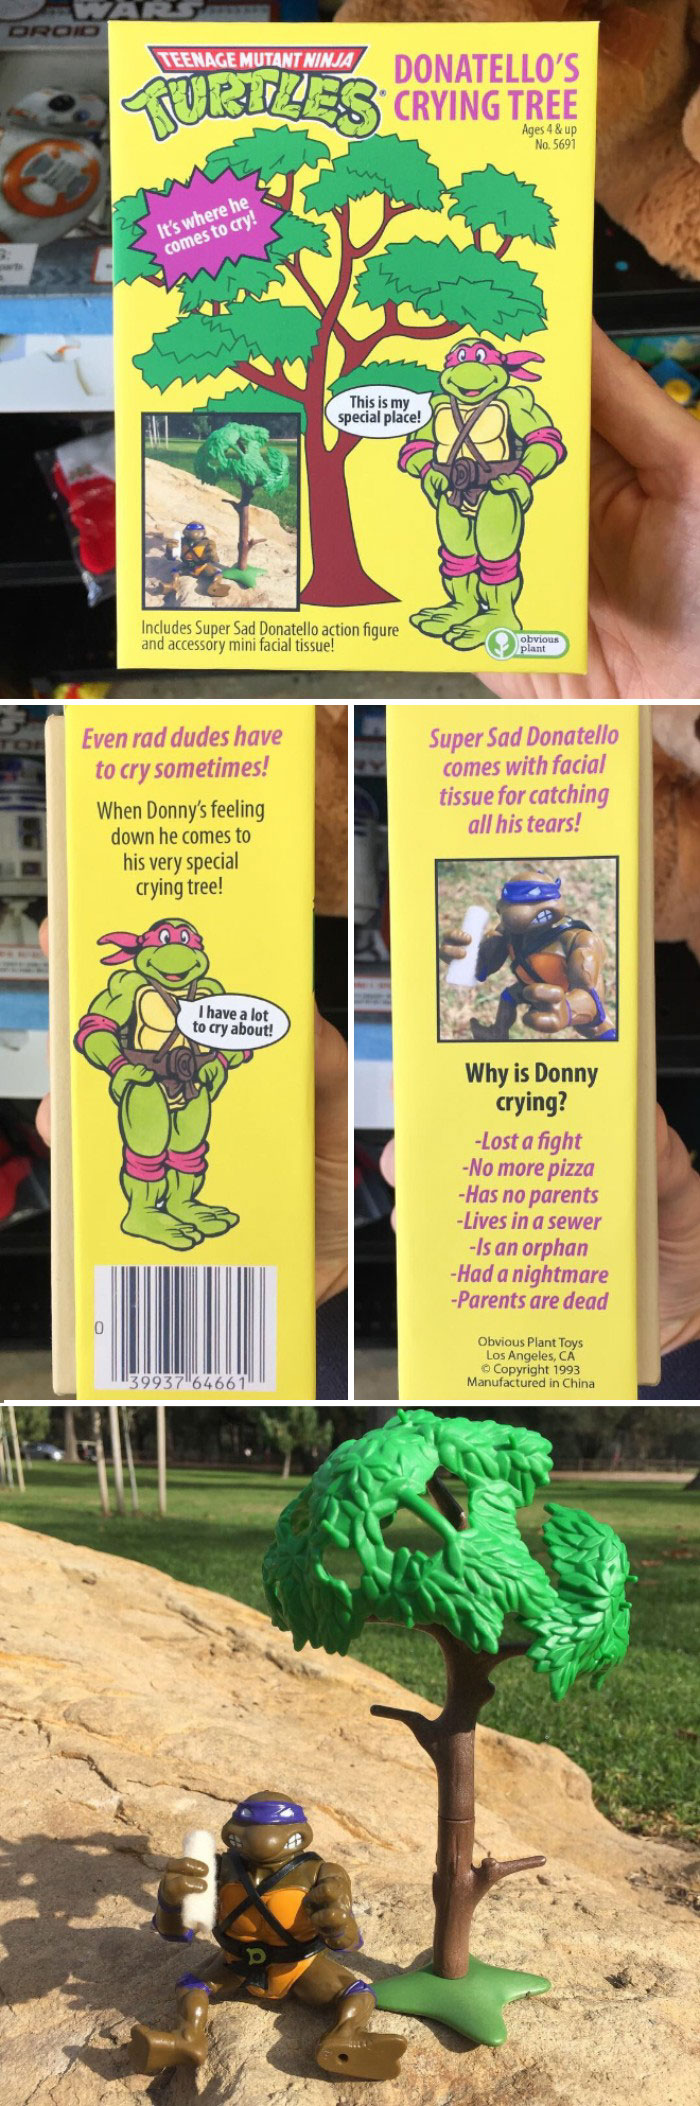 donatello's crying tree - Droid Teenage Mutant Ninja 43 Crying Tree Ages 4 & up No. 5691 It's where he comes to cry! This is my special place! Includes Super Sad Donatello action figure and accessory mini facial tissue! obvious plant Even rad dudes have t